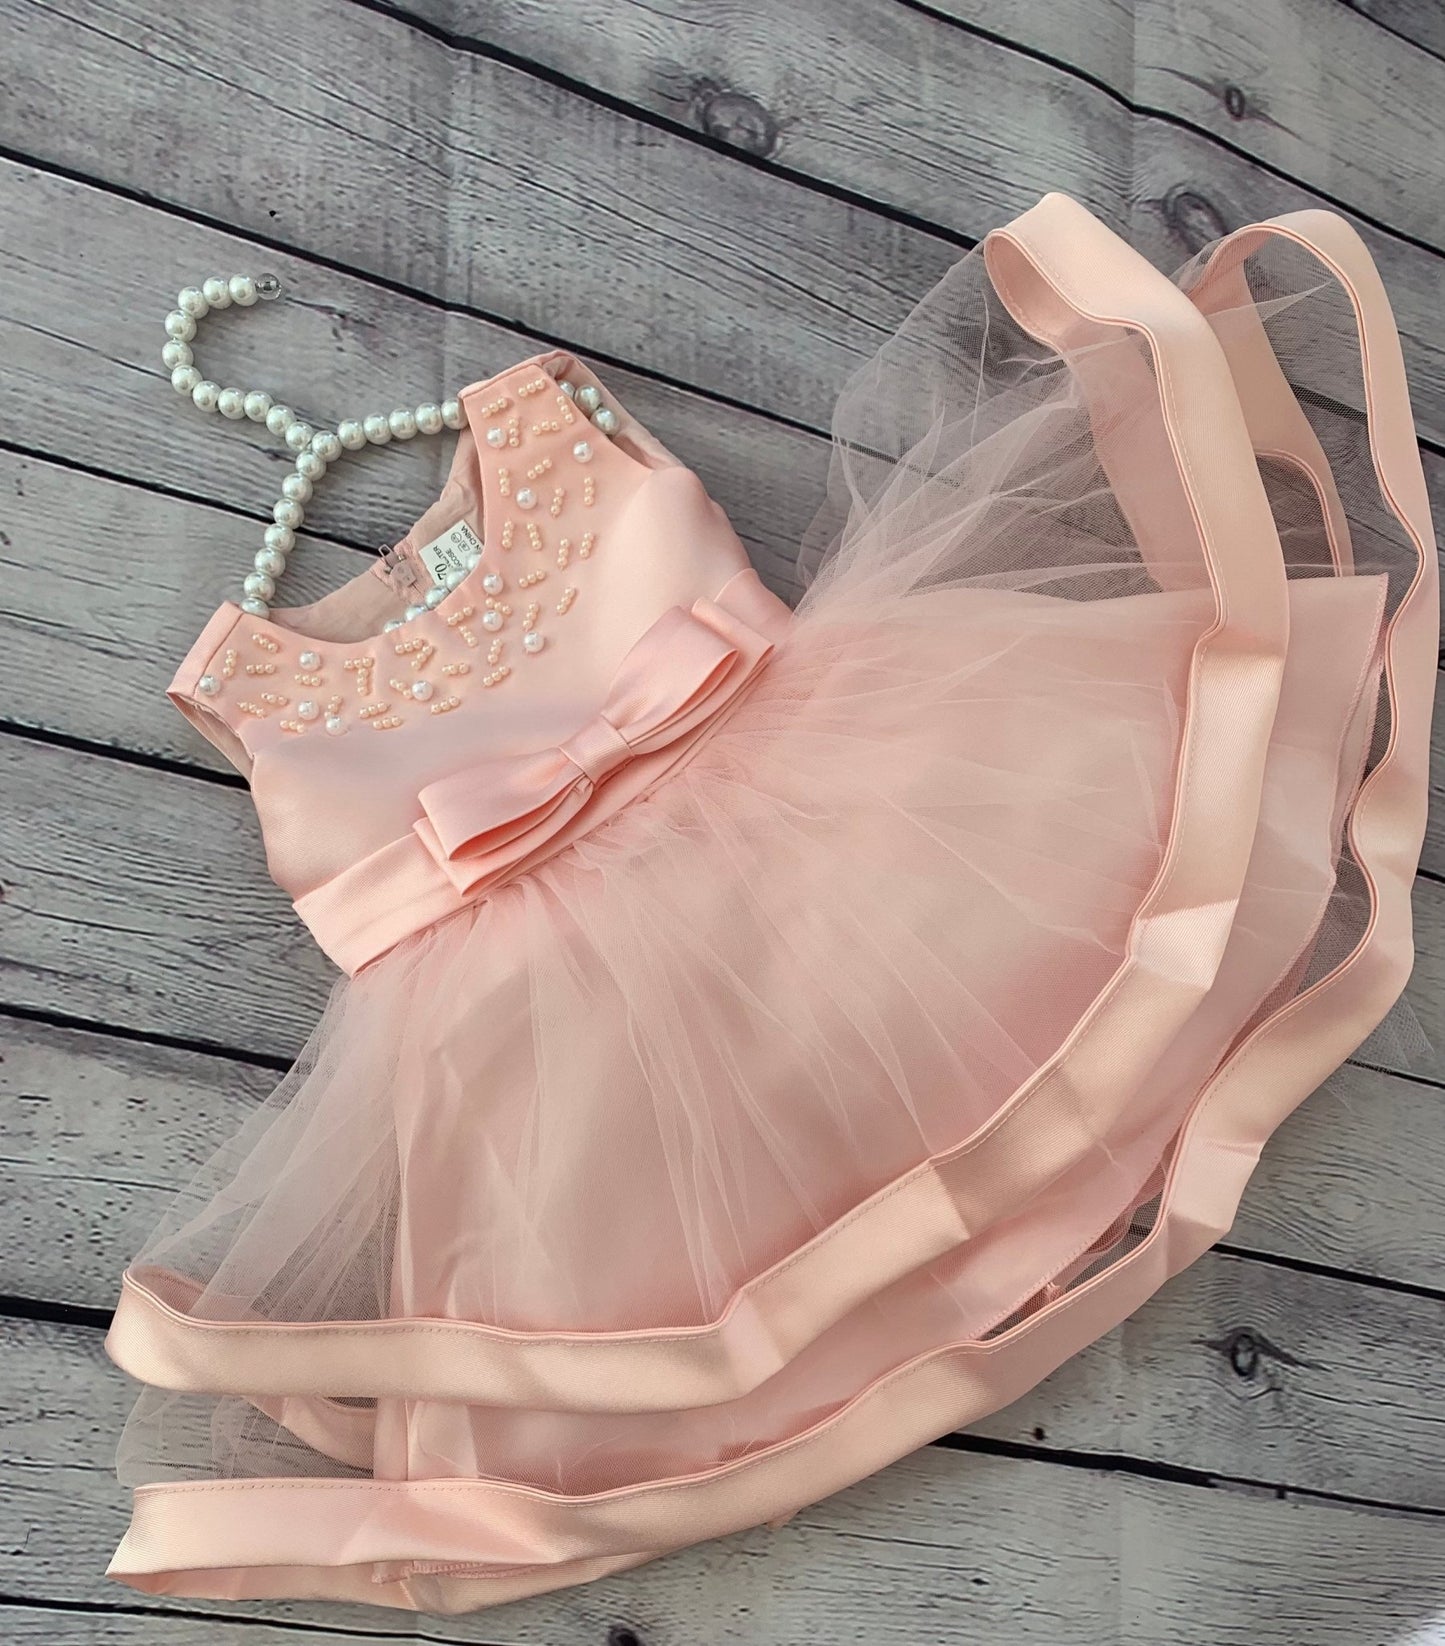 Delicate Little Girl Pink/Peach or Beige Party Dress - TinySweetPeaBoutique